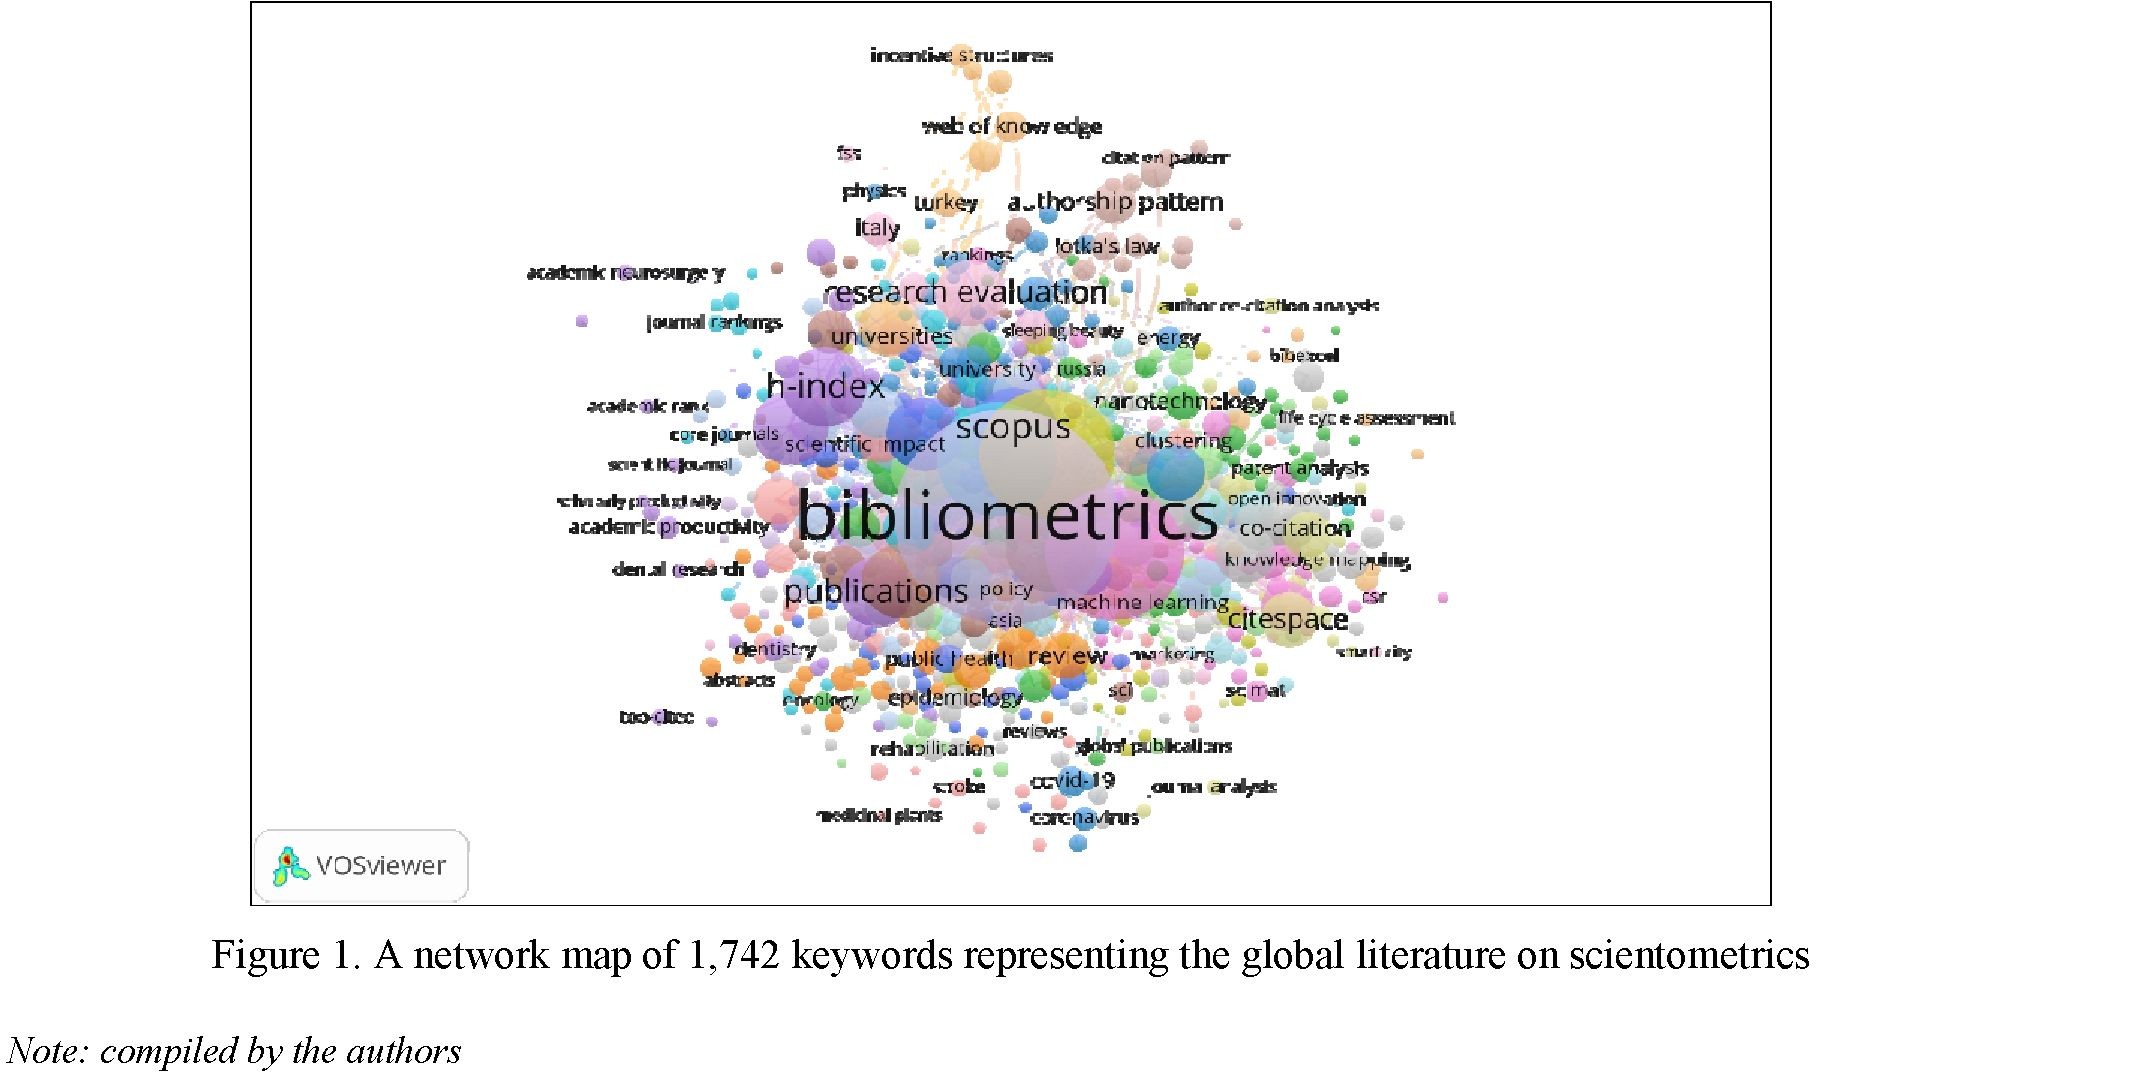 Content, network, and density analysis of the global and Kazakhstani literature on scientometrics